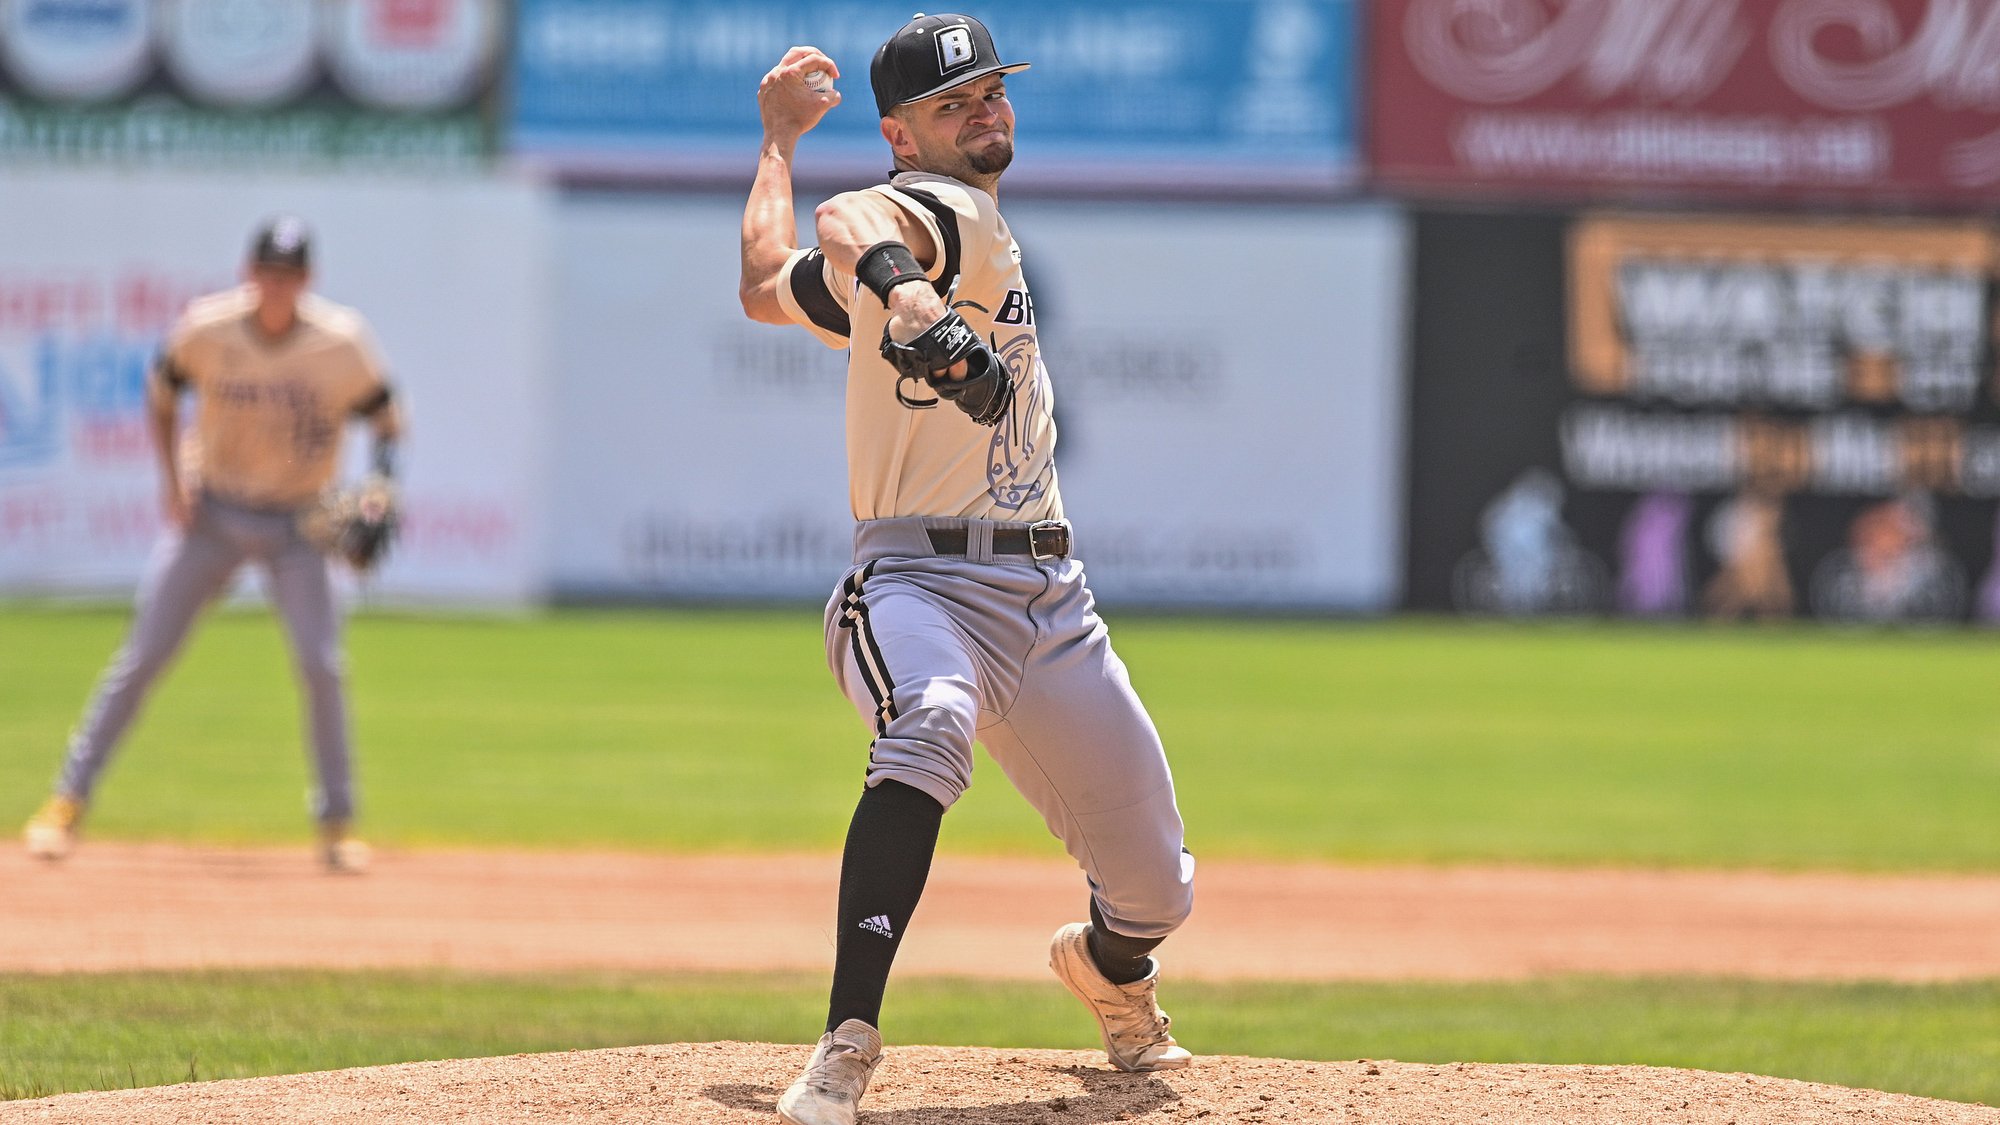 Frasier, Bryant force Game 7 with 7-2 win over LIU